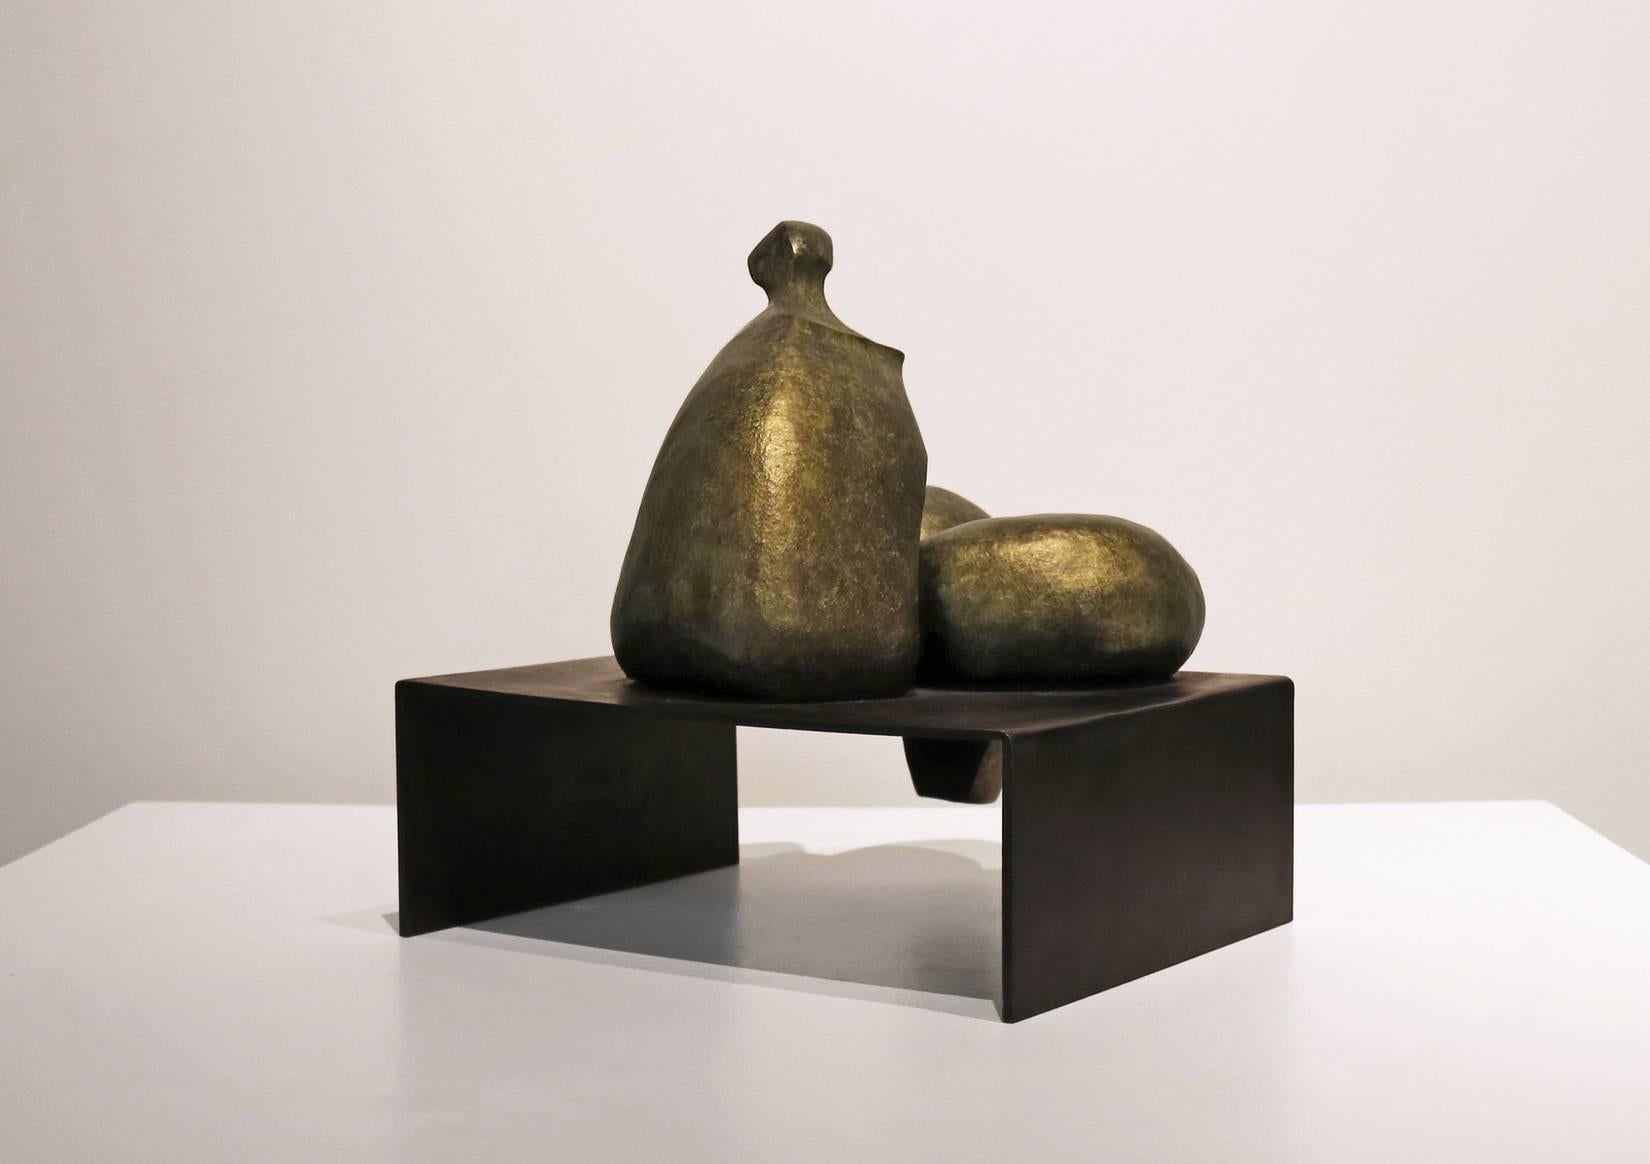 Seated 4 Miniature - Contemporary Sculpture by Robert Holmes